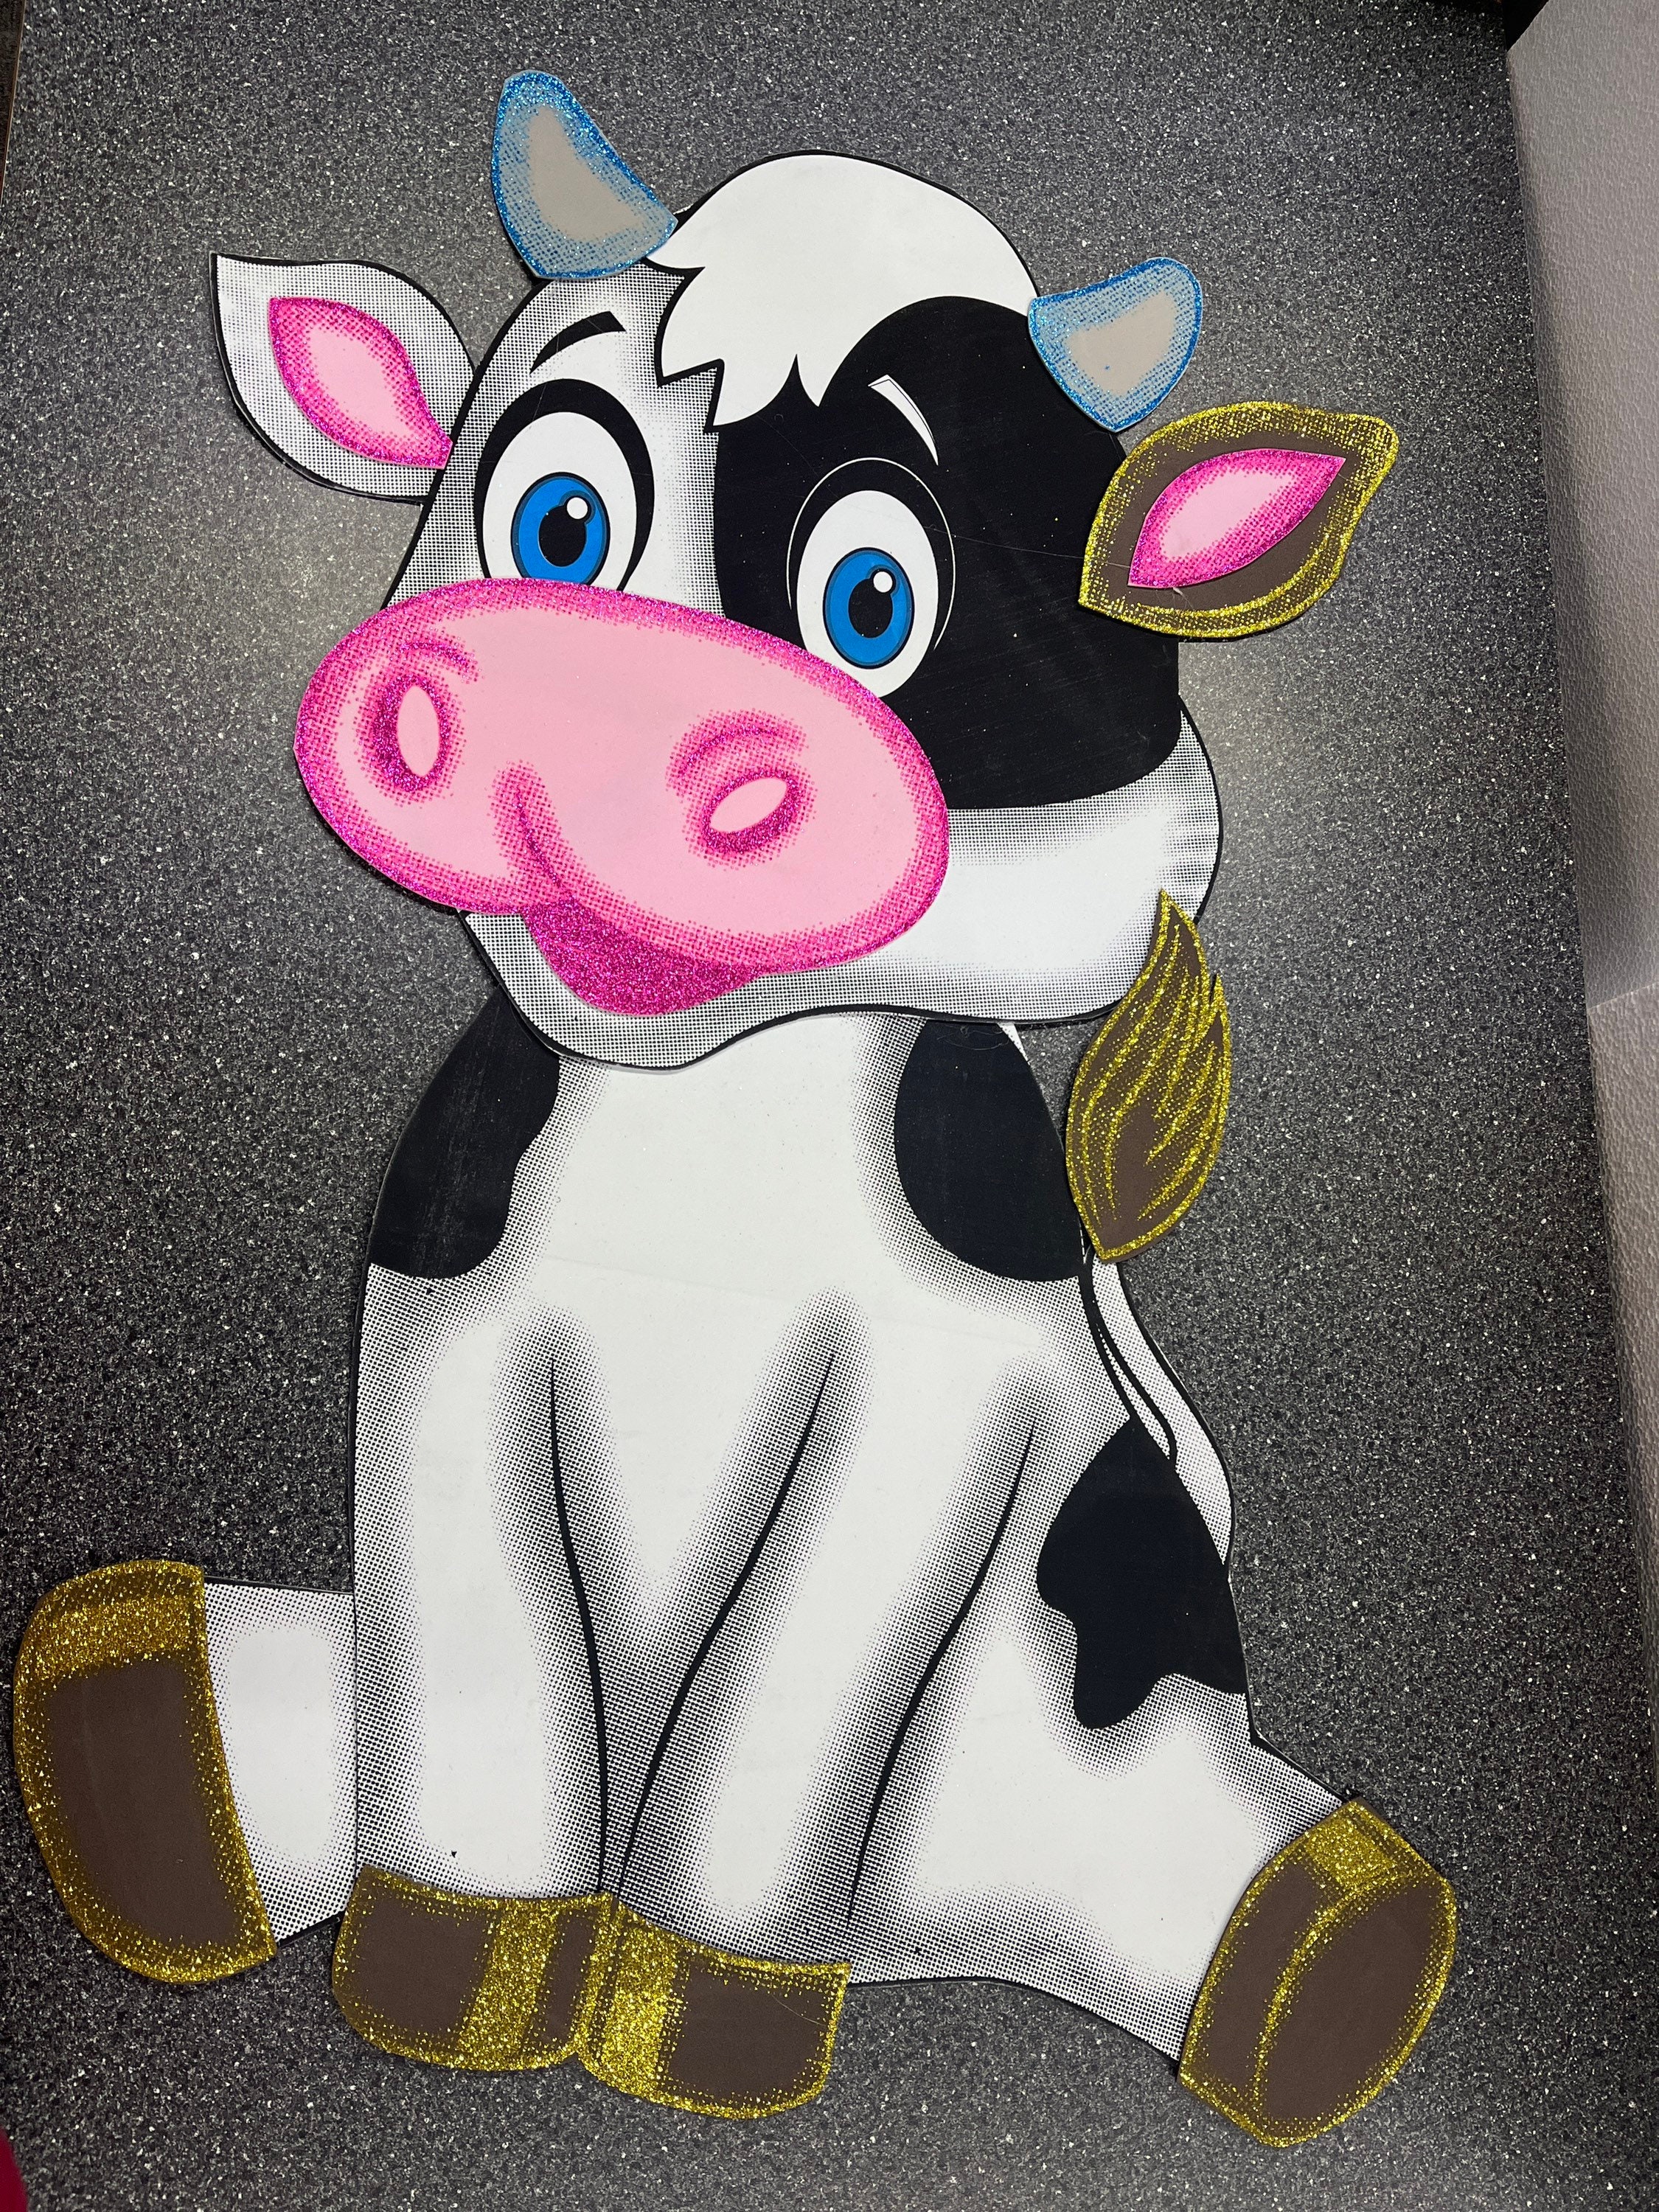 La Vaca Lola Inspired Big Foamy Die Cutout SAME DAY SHIPPING All Orders  Before 2 P.M C.T.M, Business Days Only -  Israel